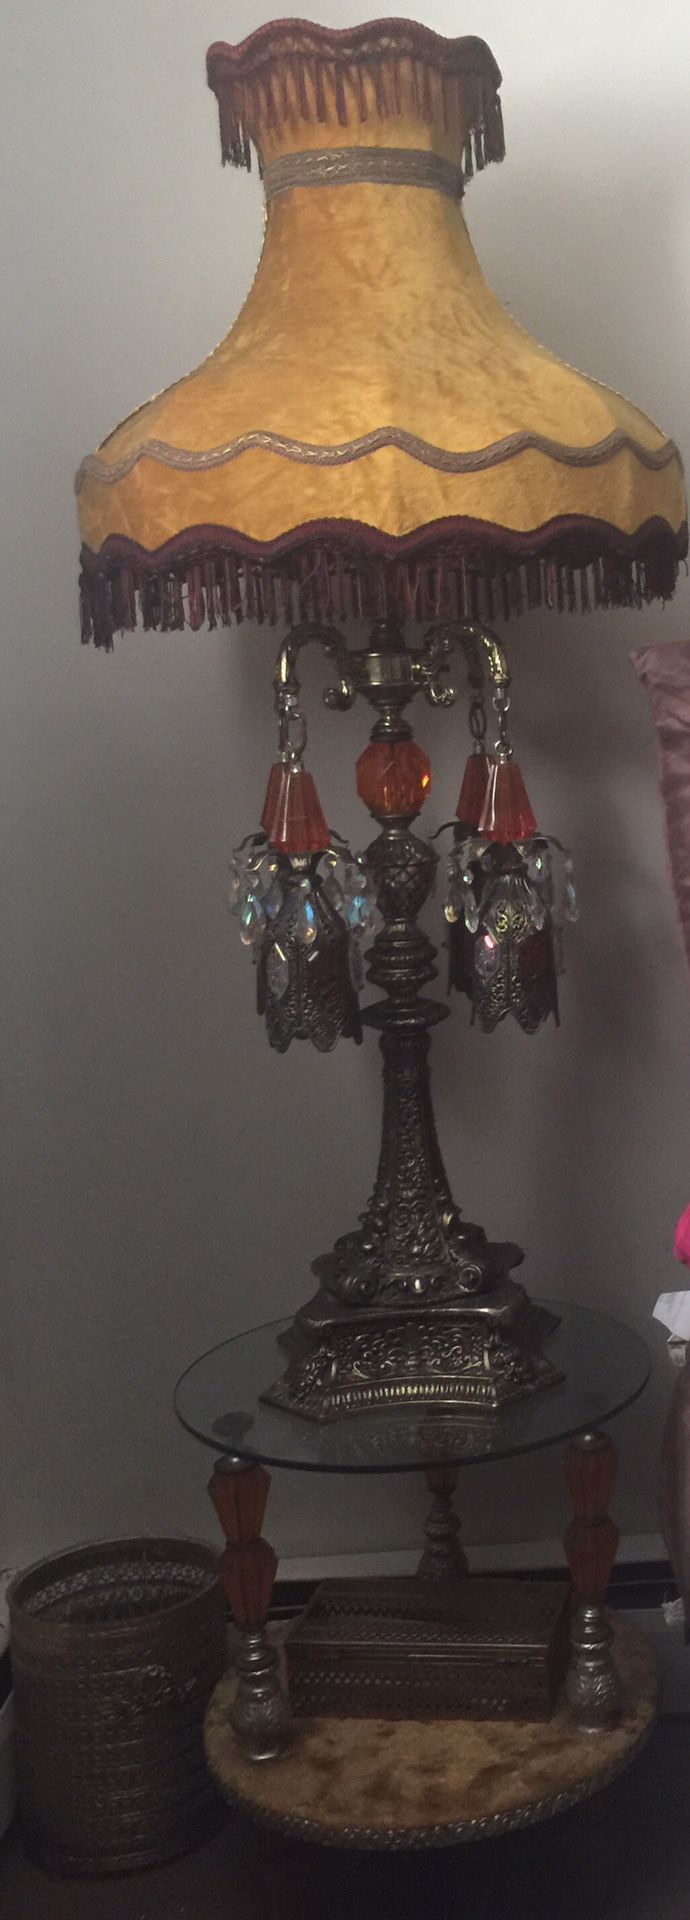 Very beautiful antique table lamp set very heavy metal very heavy and crystal table set $2500